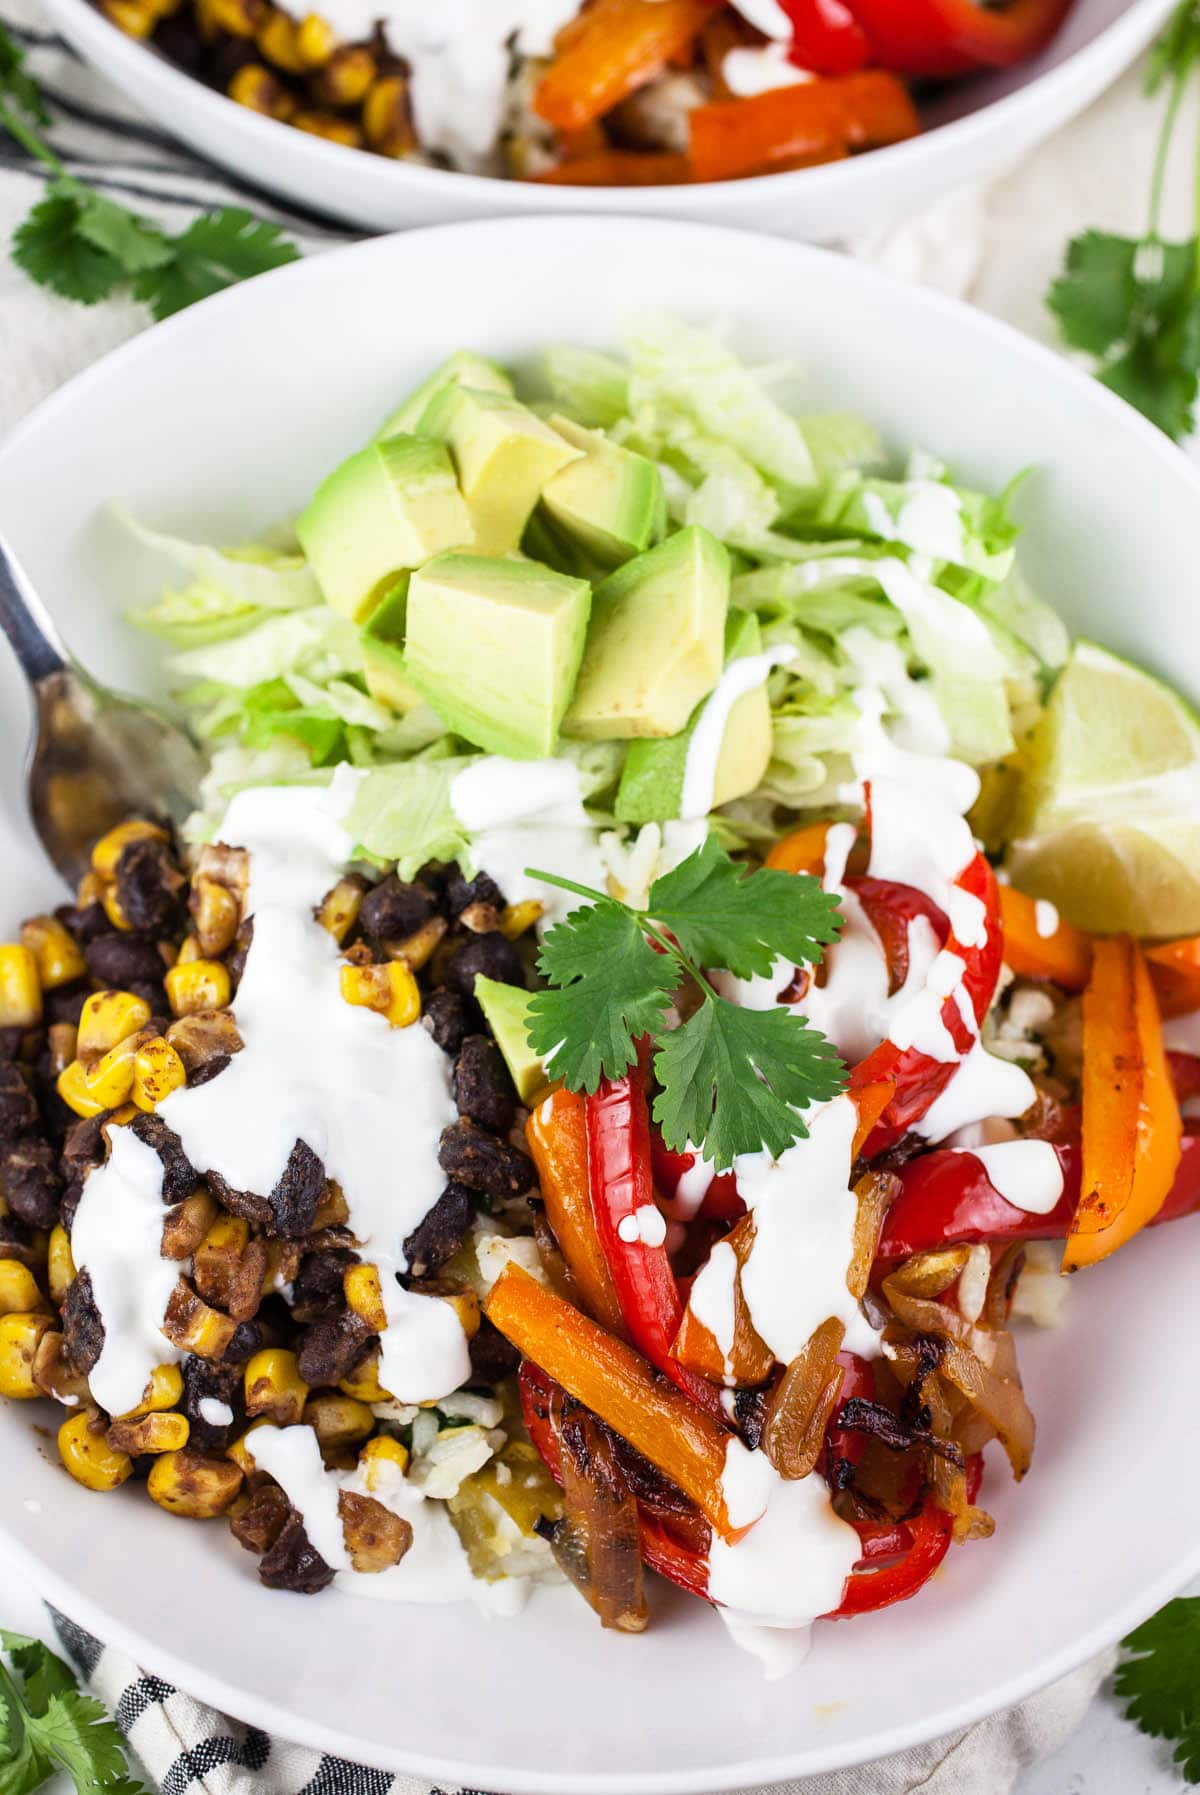 Vegetarian fajita bowl with bell peppers, onions, black beans, corn, avocado, and lime crema.